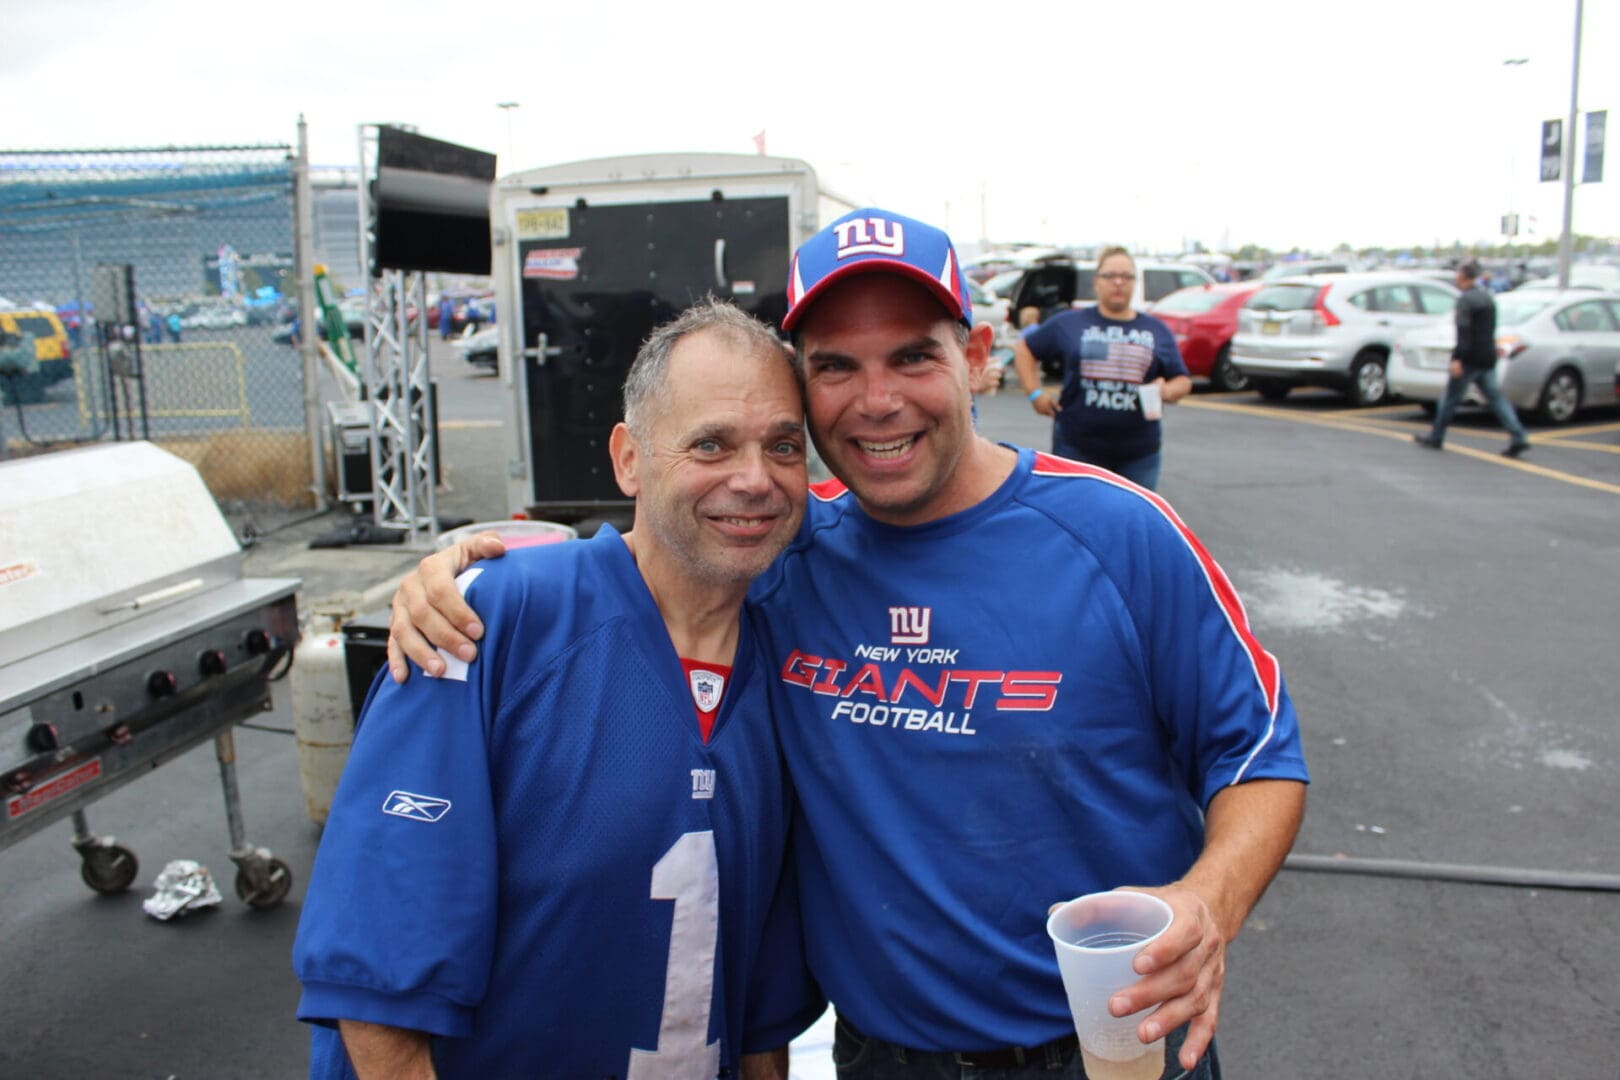 Two men in football jerseys are posing for a picture.